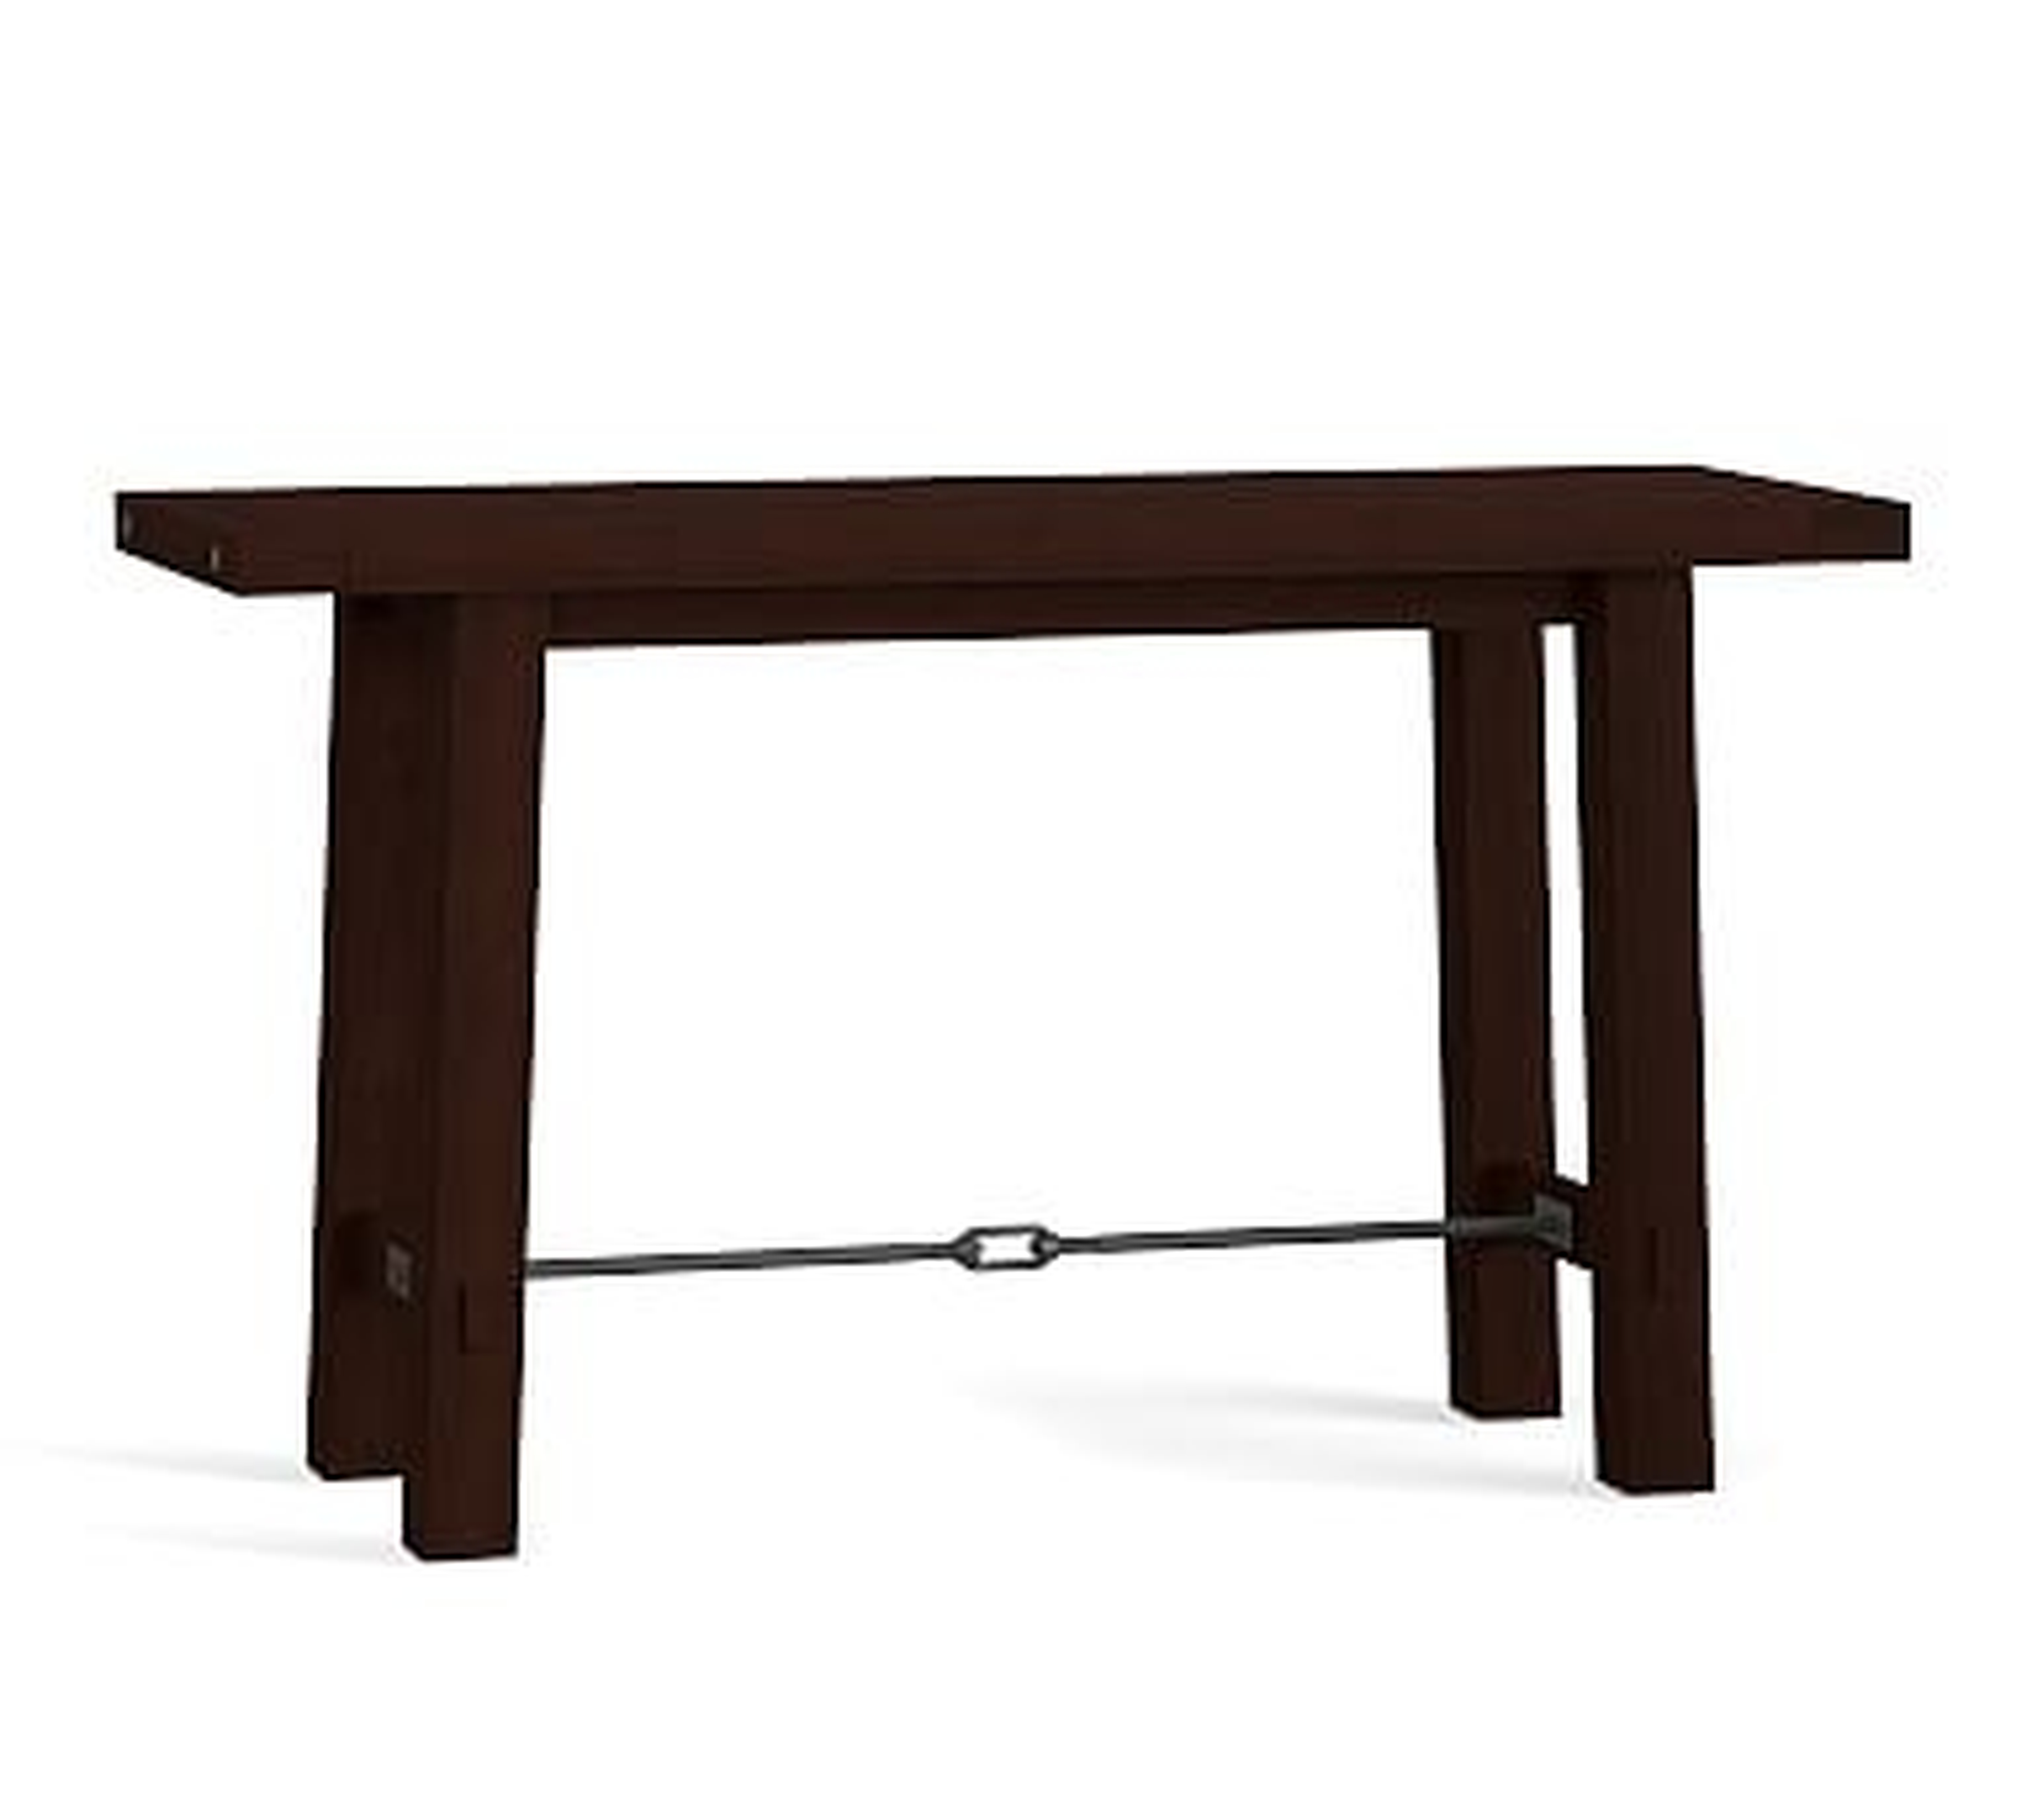 Benchwright Counter Height Table, Rustic Mahogany - Pottery Barn